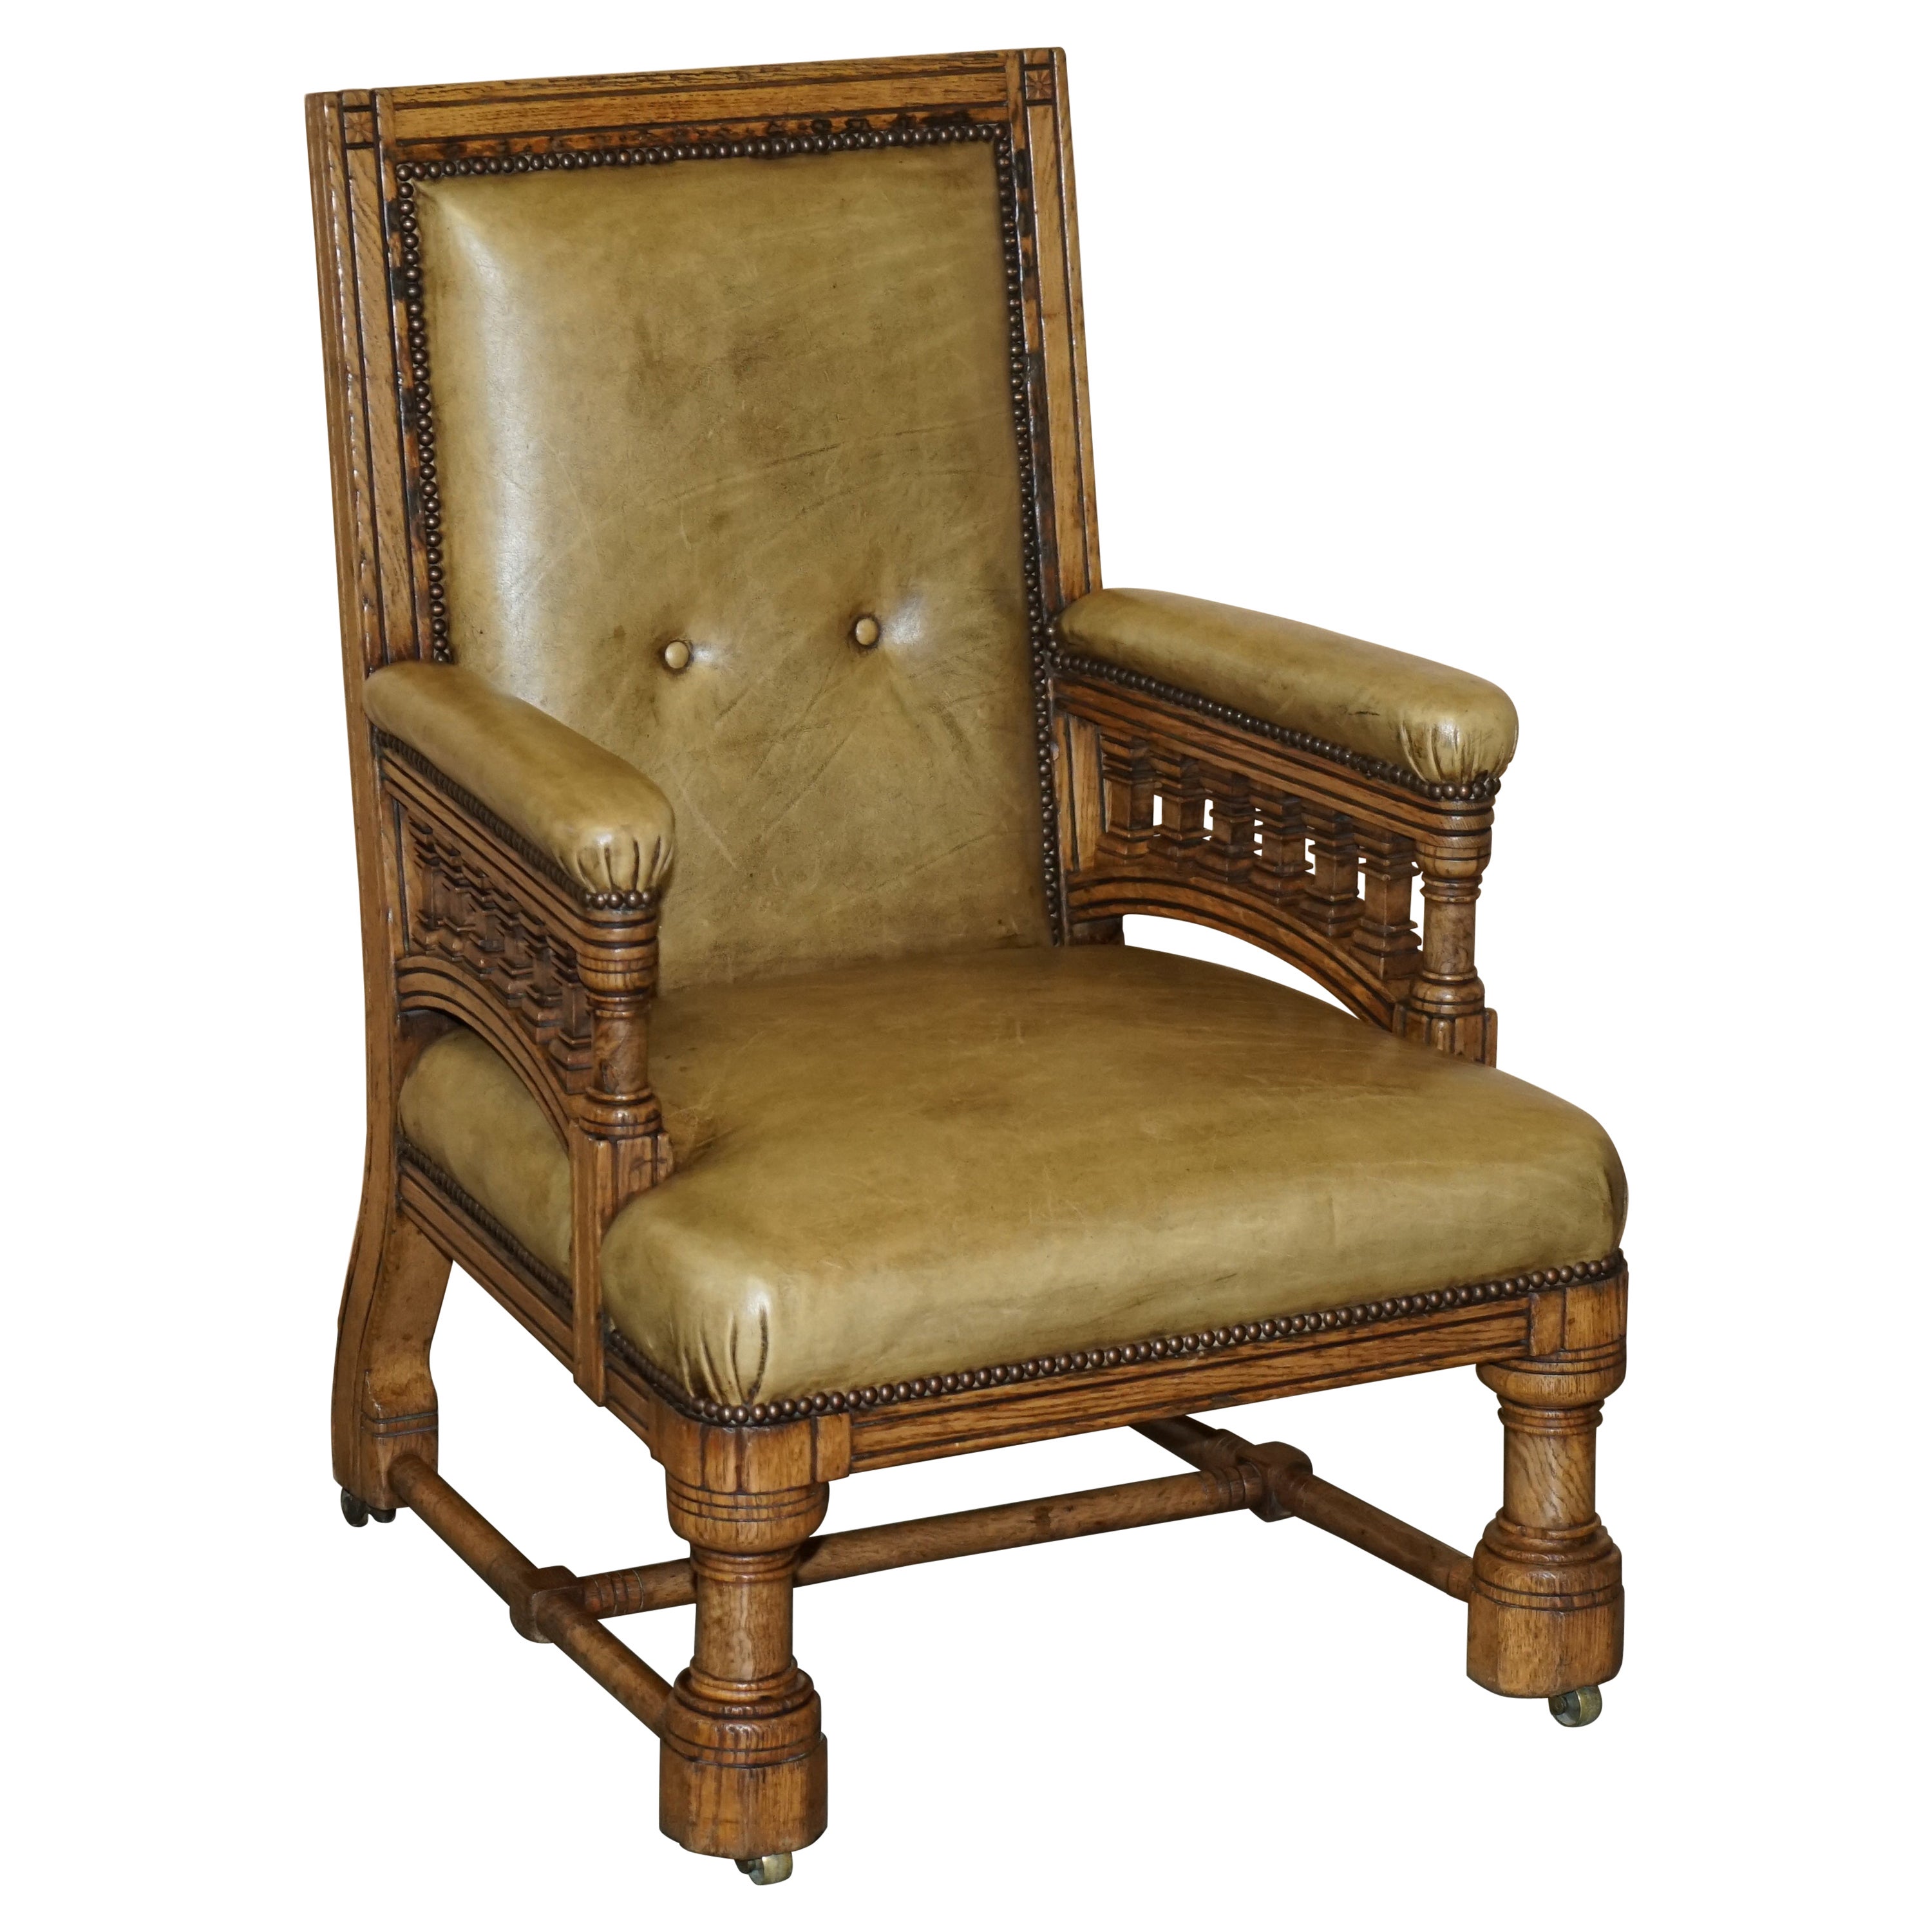 Original Victorian English Oak Hand Dyed Leather Library Reading Armchair For Sale